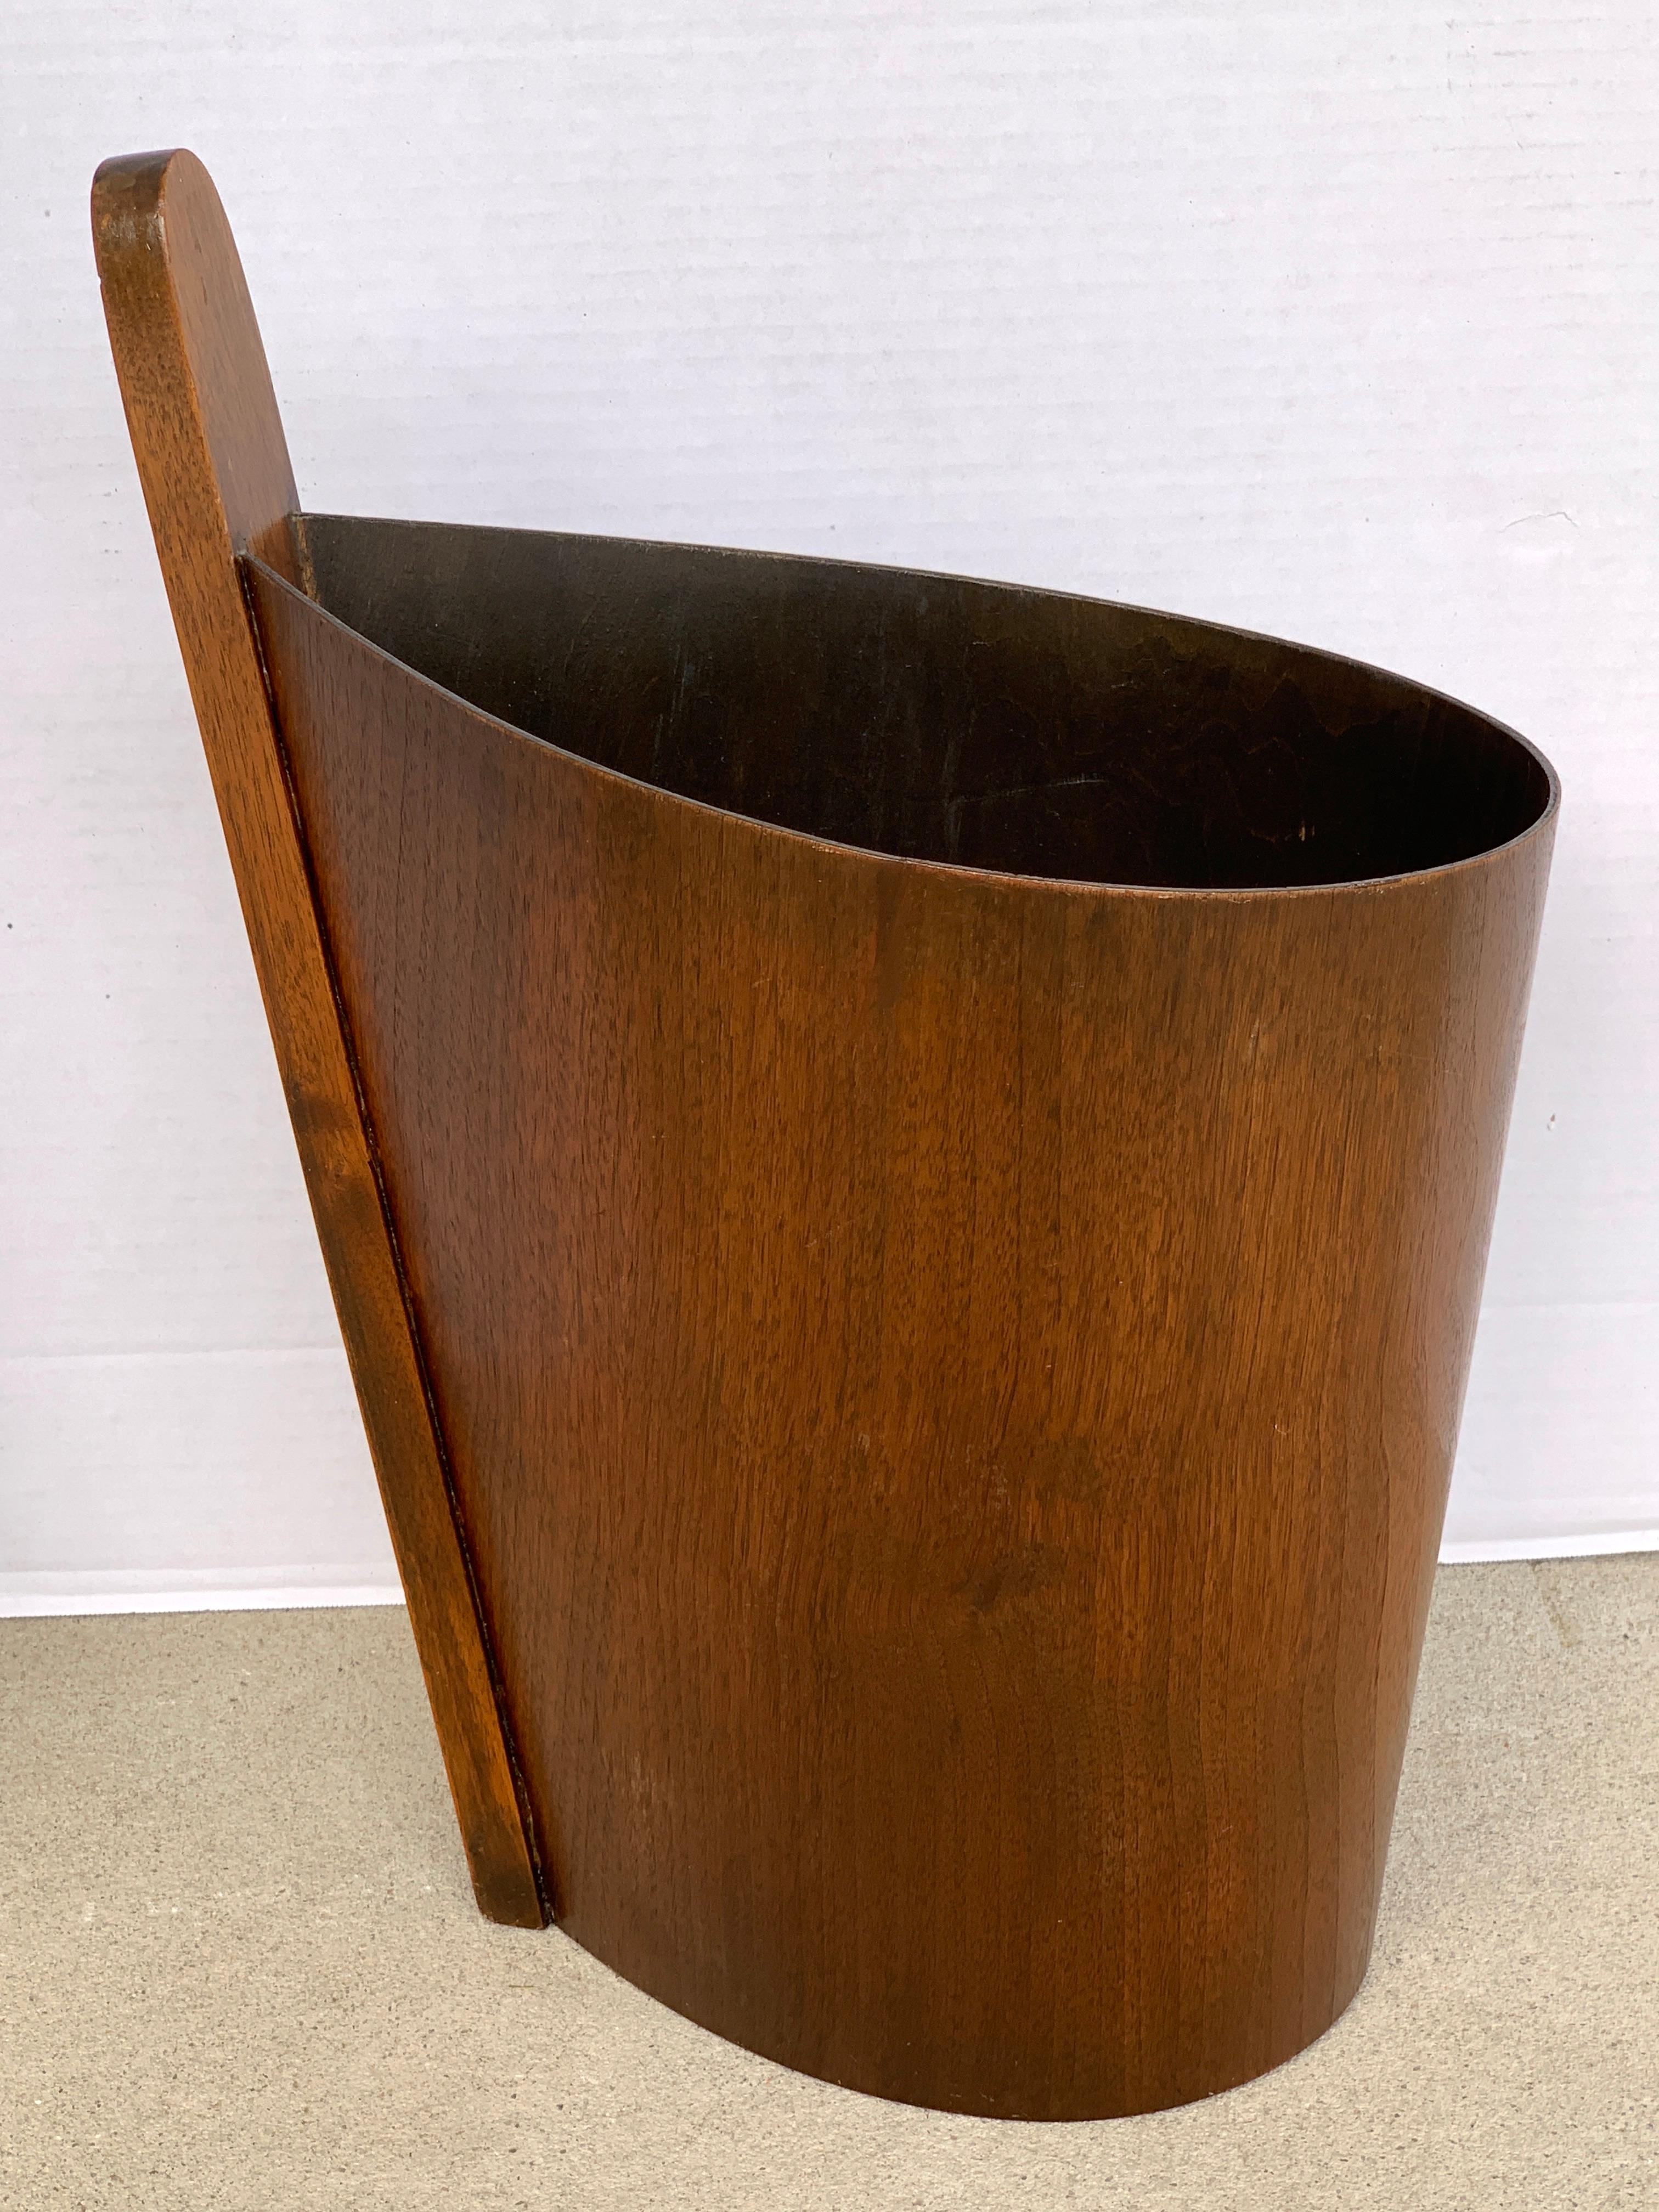 Danish modern teak and walnut wastepaper basket, by P. S. Heggen. An early 1950s example, of exceptional design, with extended handle 18.5